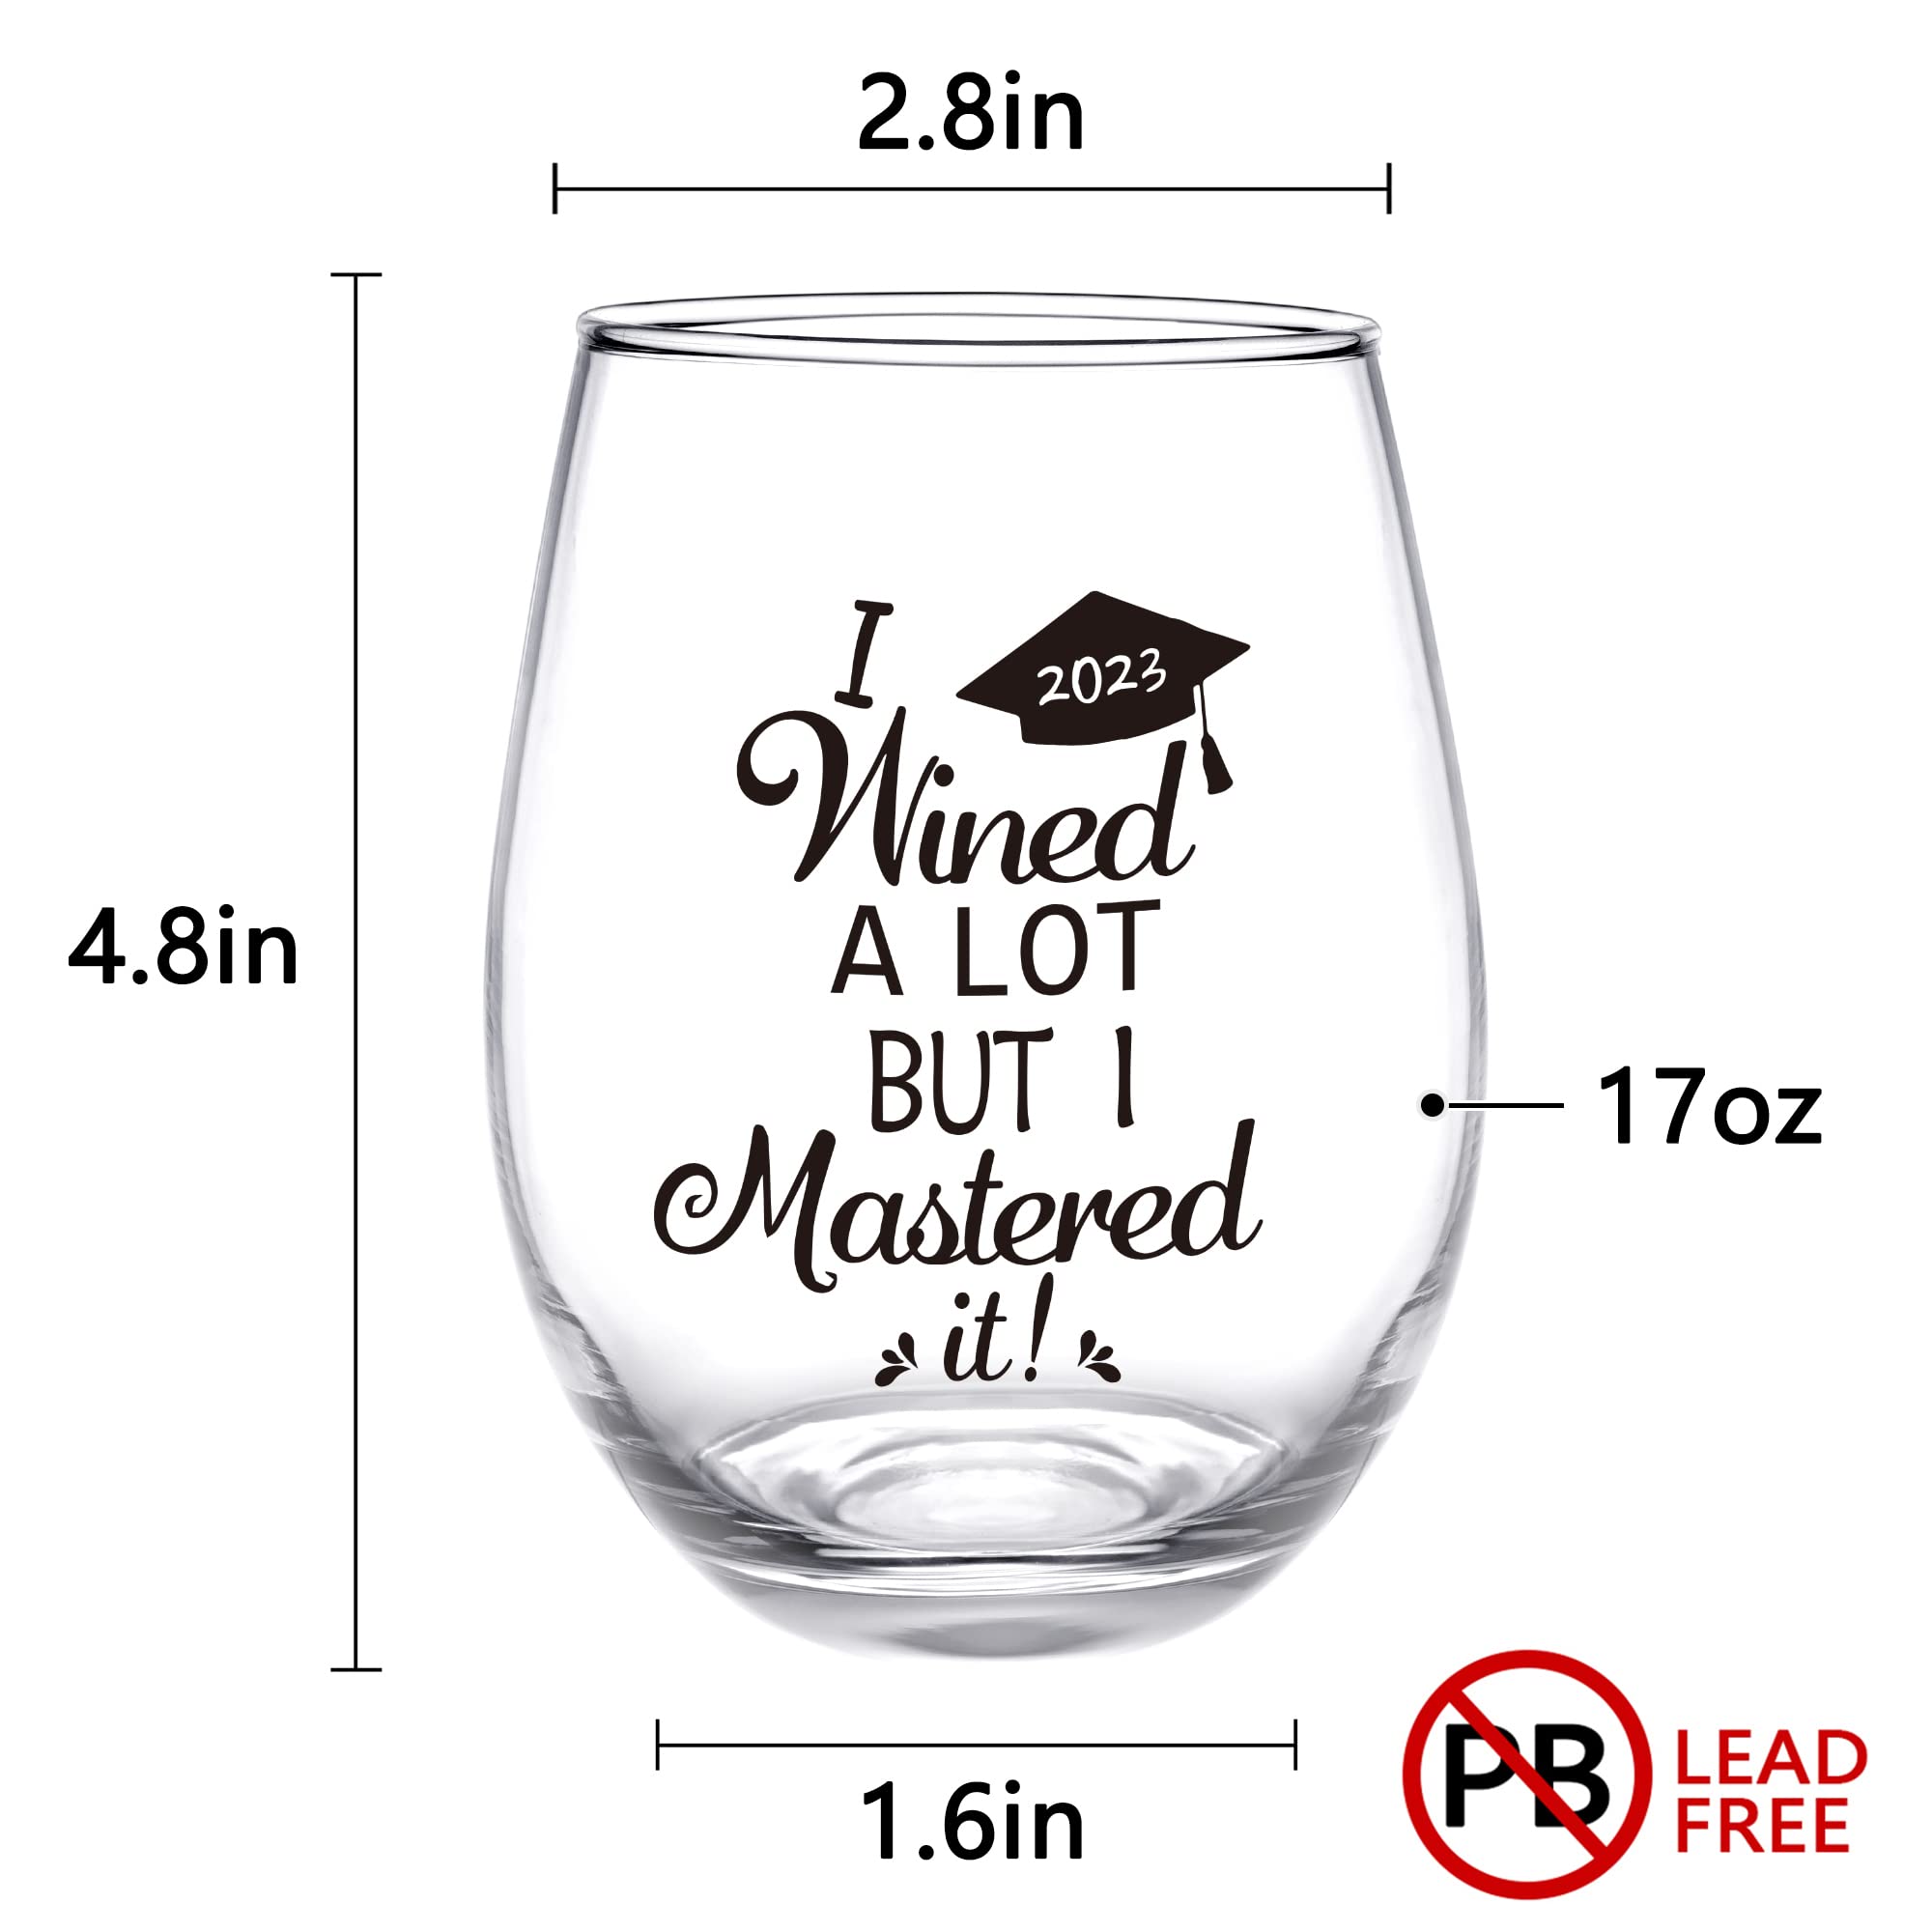 Modwnfy Graduation Gifts, I Wined A Lot, But I Mastered It Stemless Wine Glass with Key Chain and Card, College Graduation Gifts for Her Him Men Women Friends University Graduate Master MBA, 17 OZ